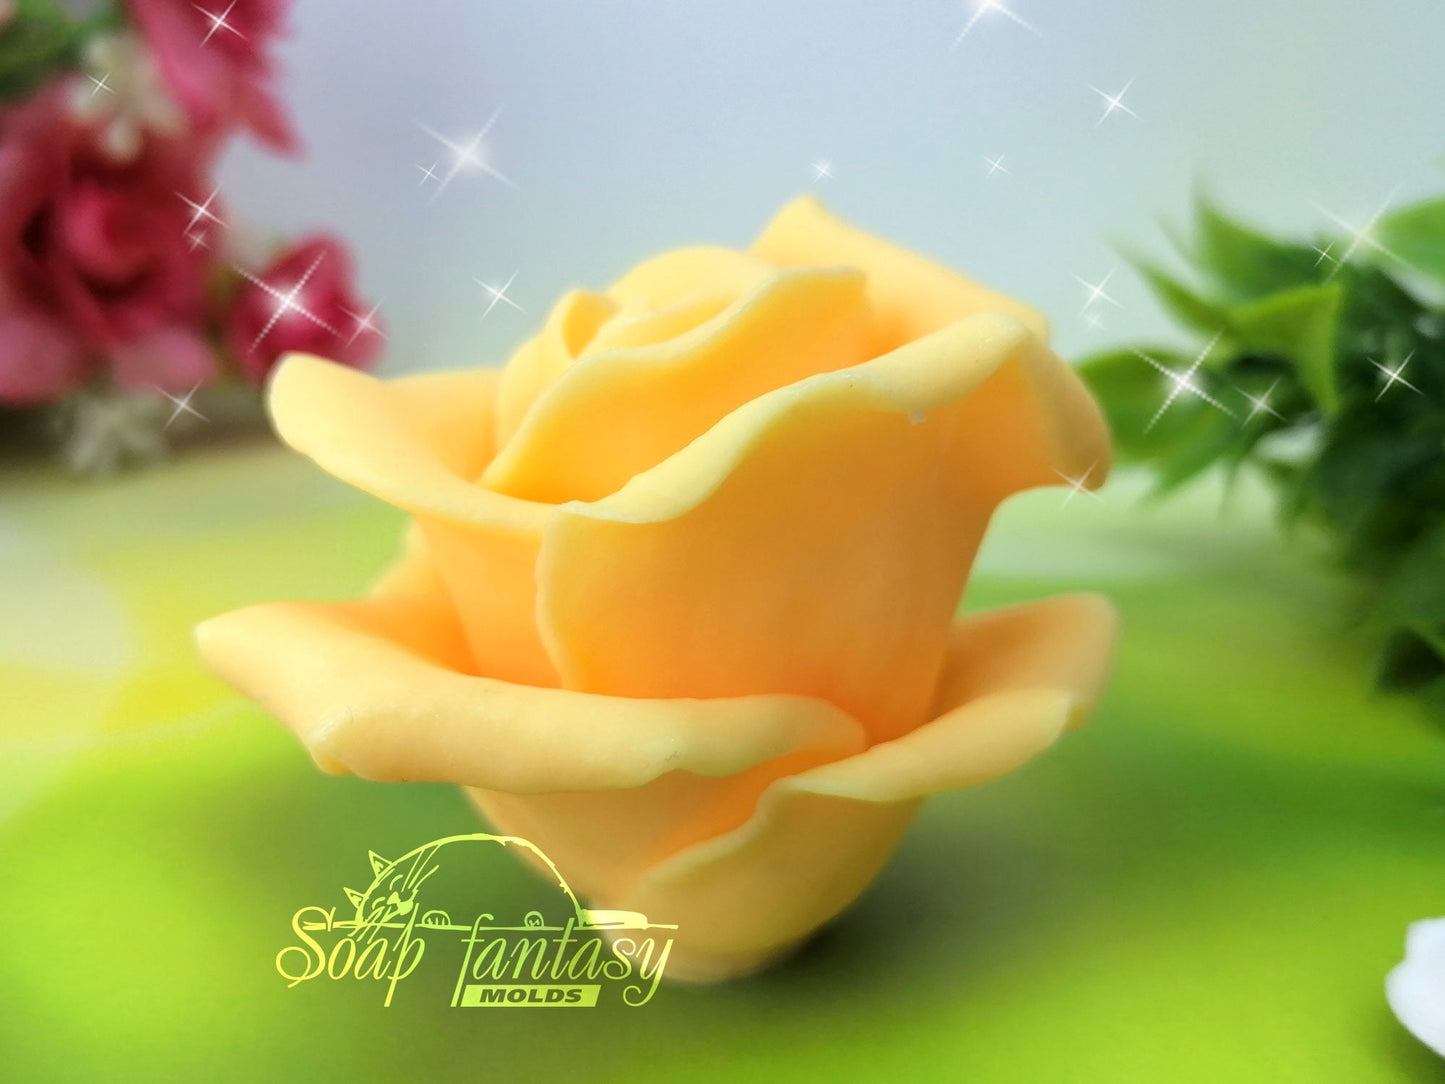 Cindy rose silicone mold for soap making